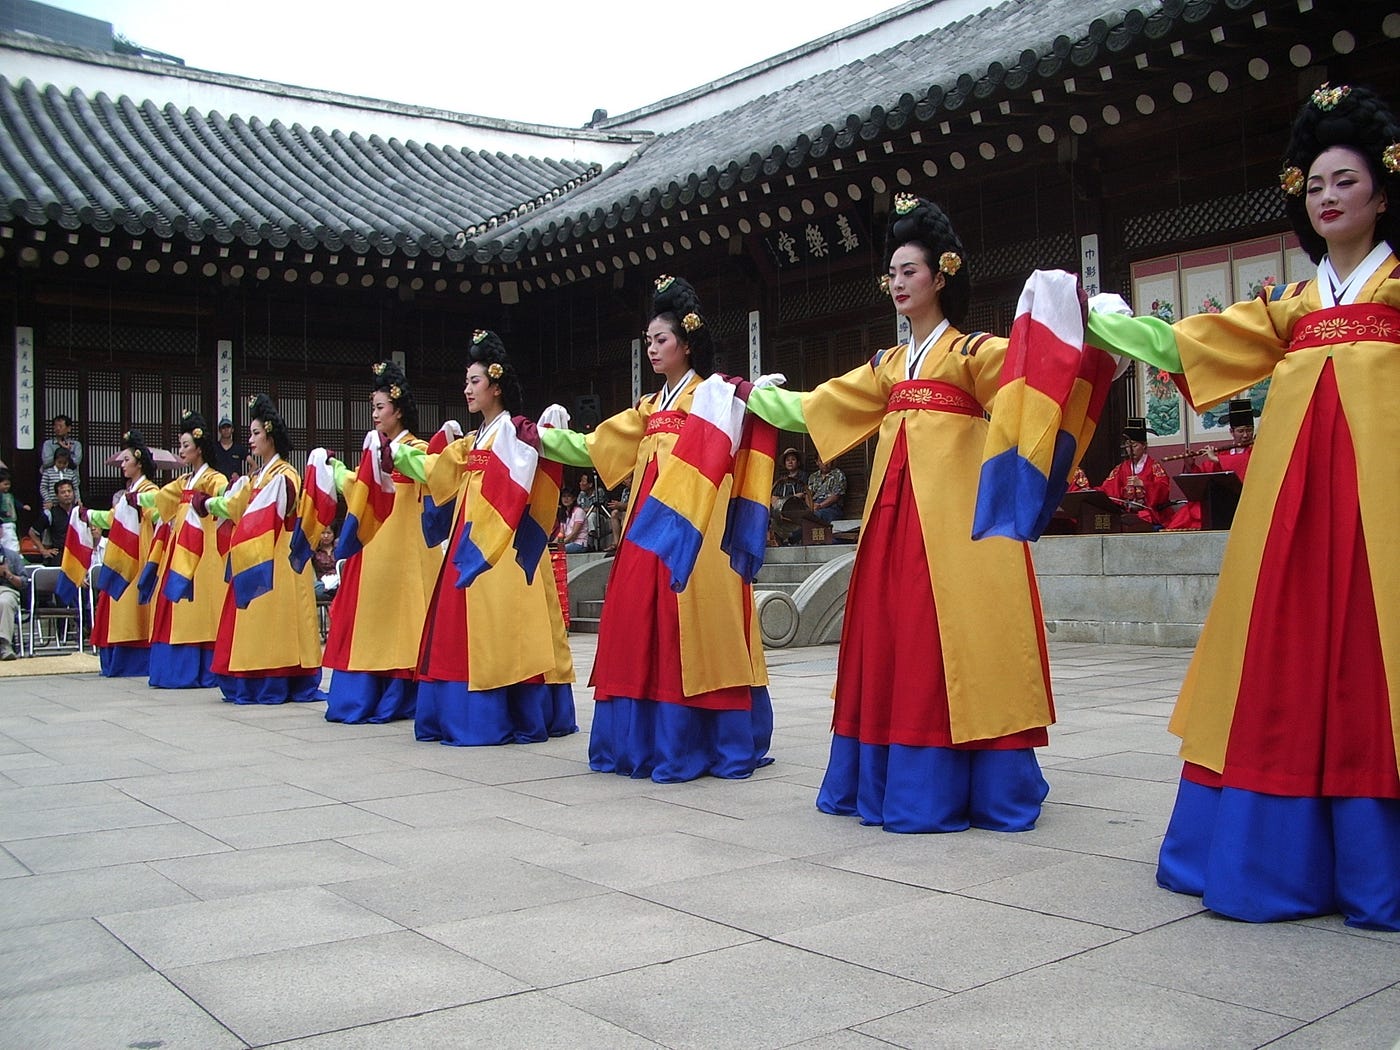 Fashion faux pas leave many questioning the role of Korea's